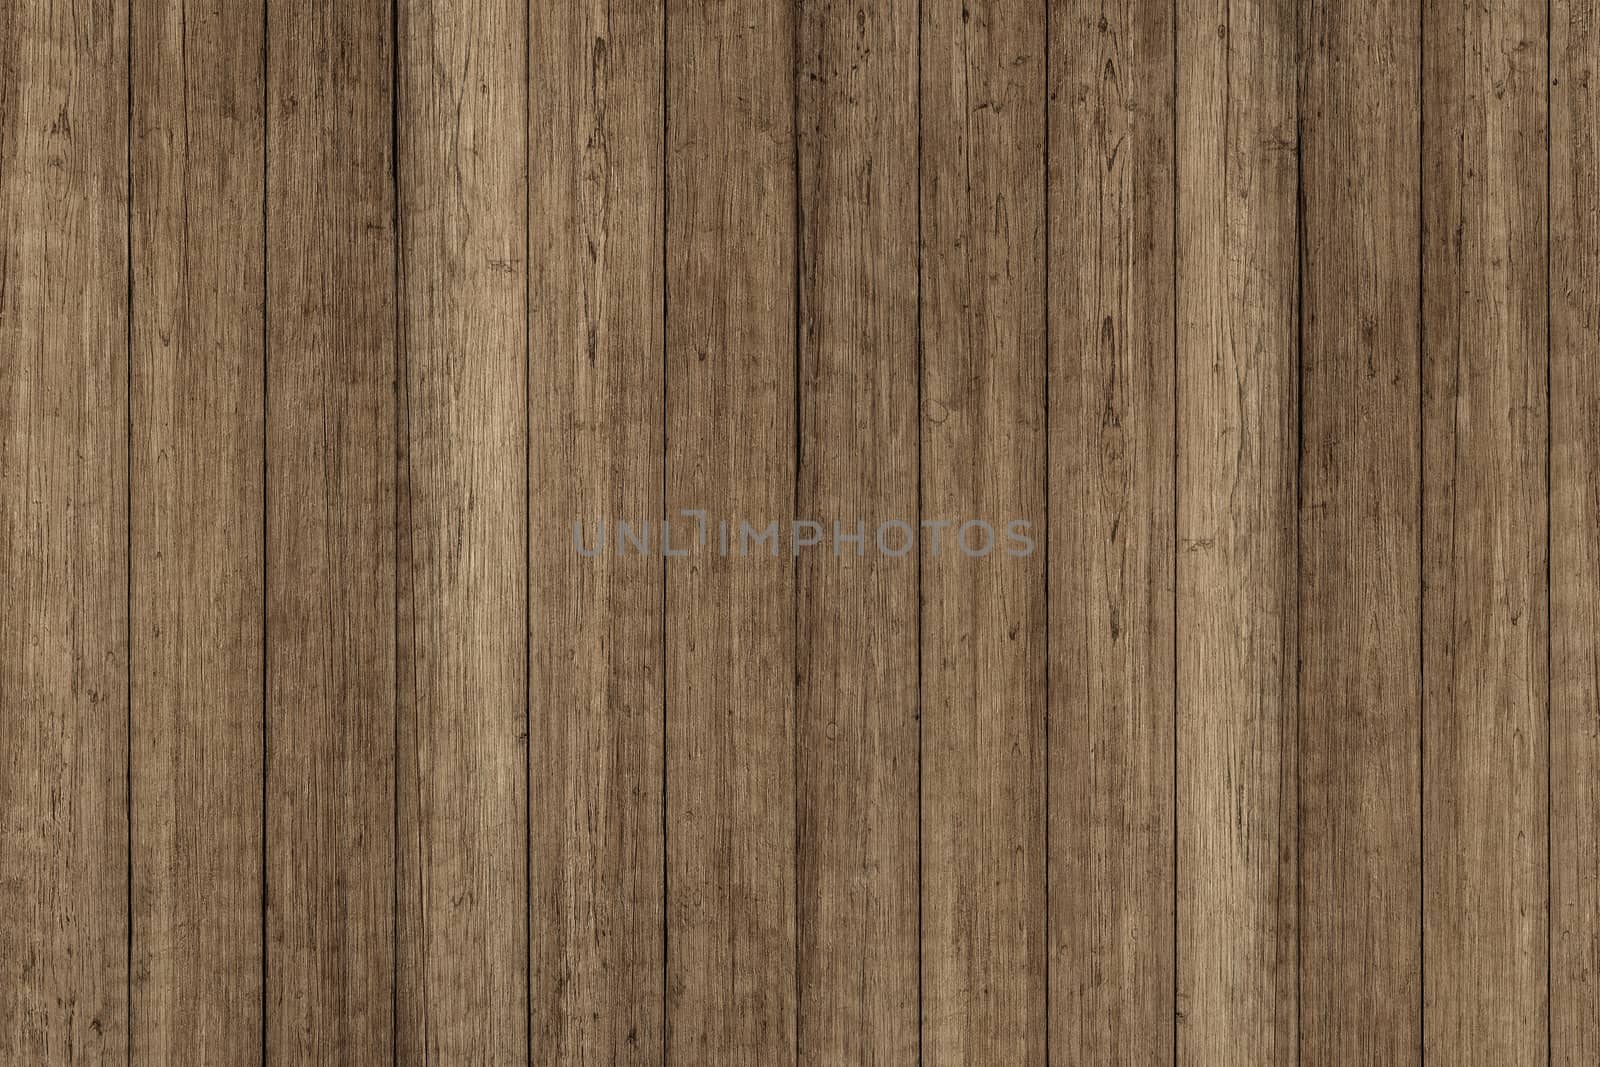 Old wood rustic background. Wood texture background